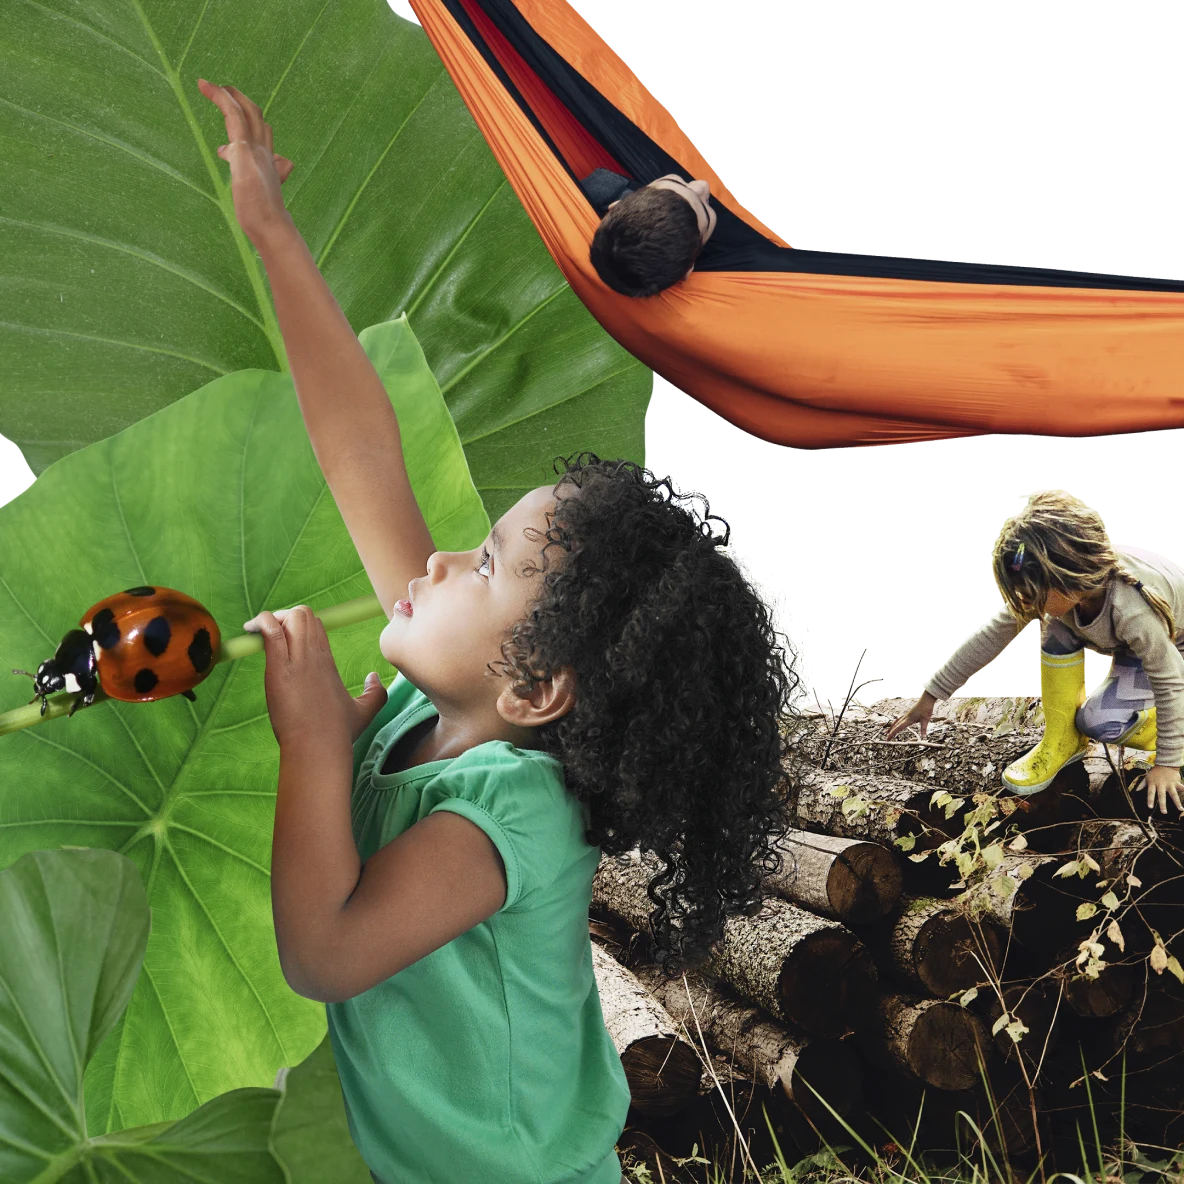 Girl in a green shirt reaches into large green leaves on the left. A ladybug crawls on the left. Child climbs on logs on the right. Child in an orange hammock at top.